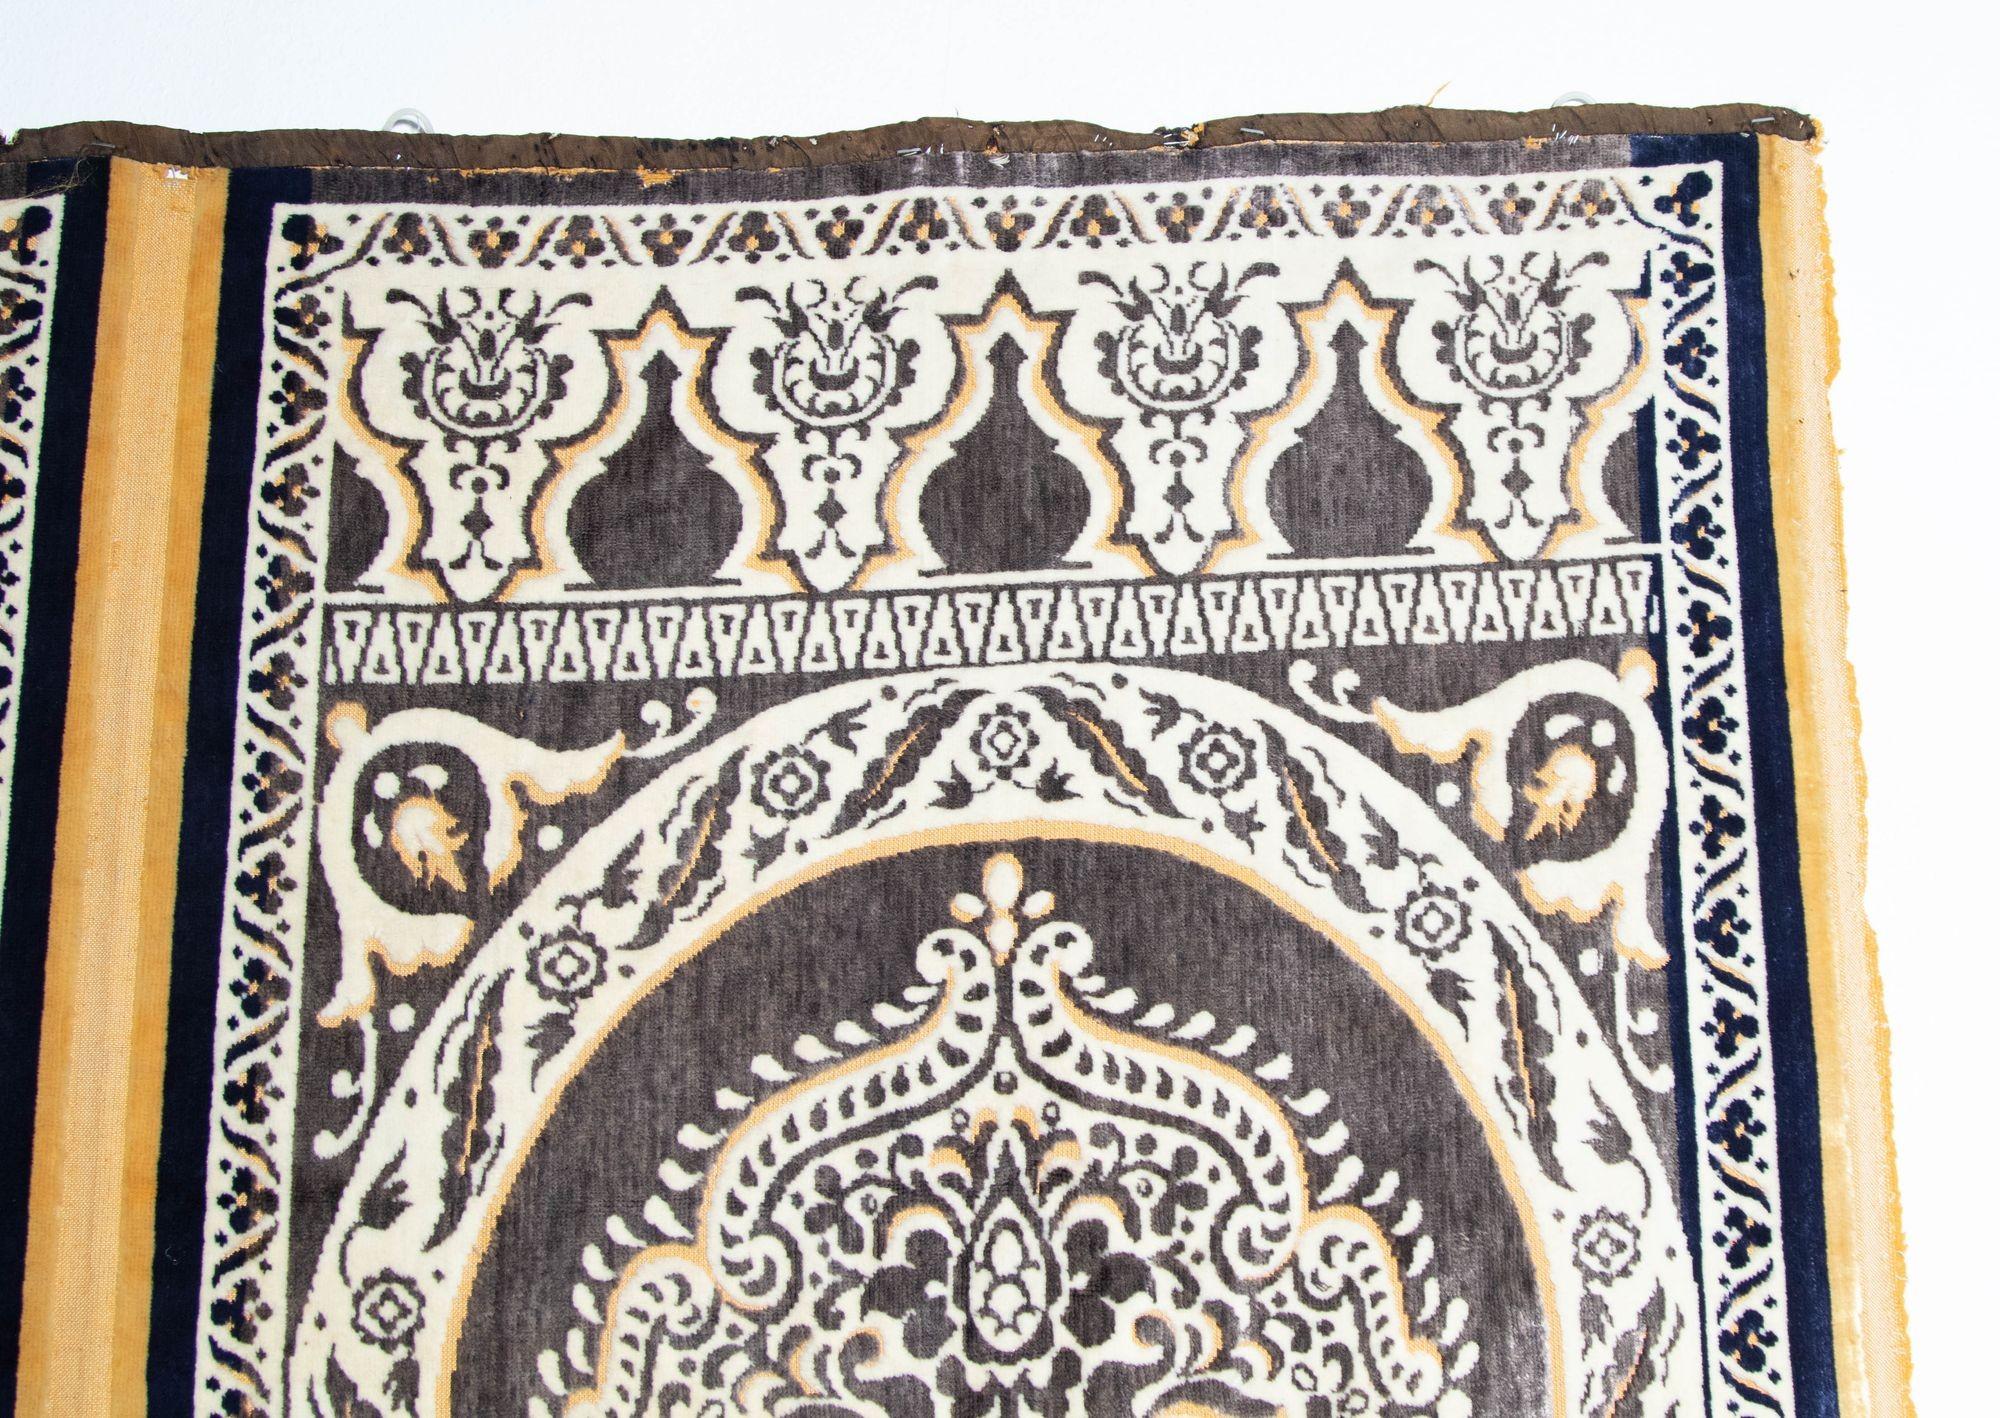 Hand-Woven Antique Moroccan Moorish Silk Textile Tapestry Wall Hanging Hiti 19th C. For Sale